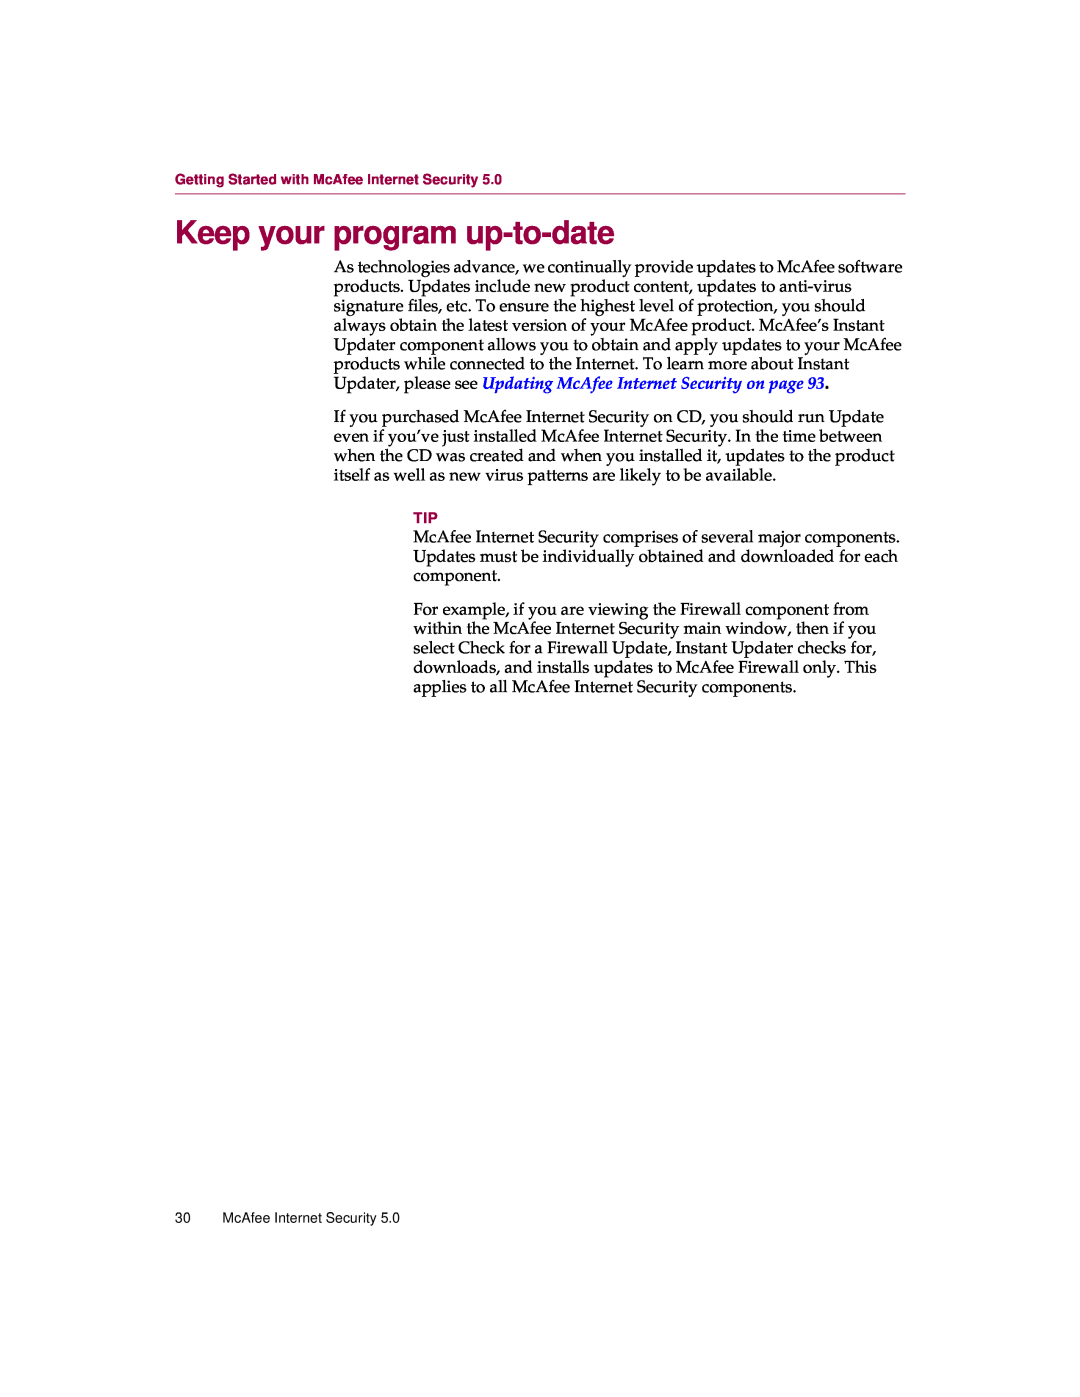 McAfee 5 manual Keep your program up-to-date, McAfee Internet Security 